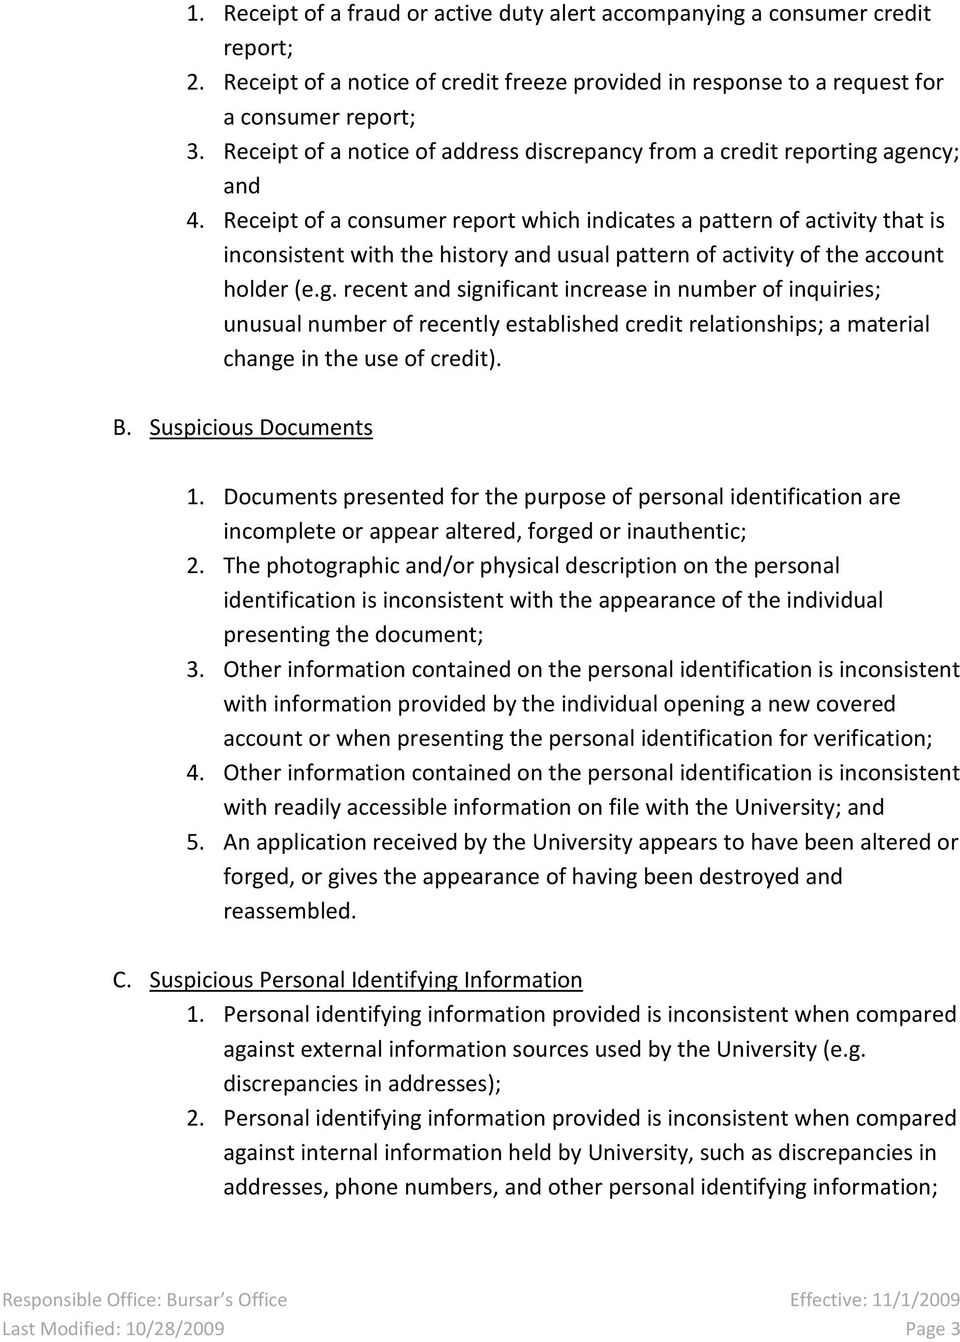 Receipt of a consumer report which indicates a pattern of activity that is inconsistent with the history and usual pattern of activity of the account holder (e.g.